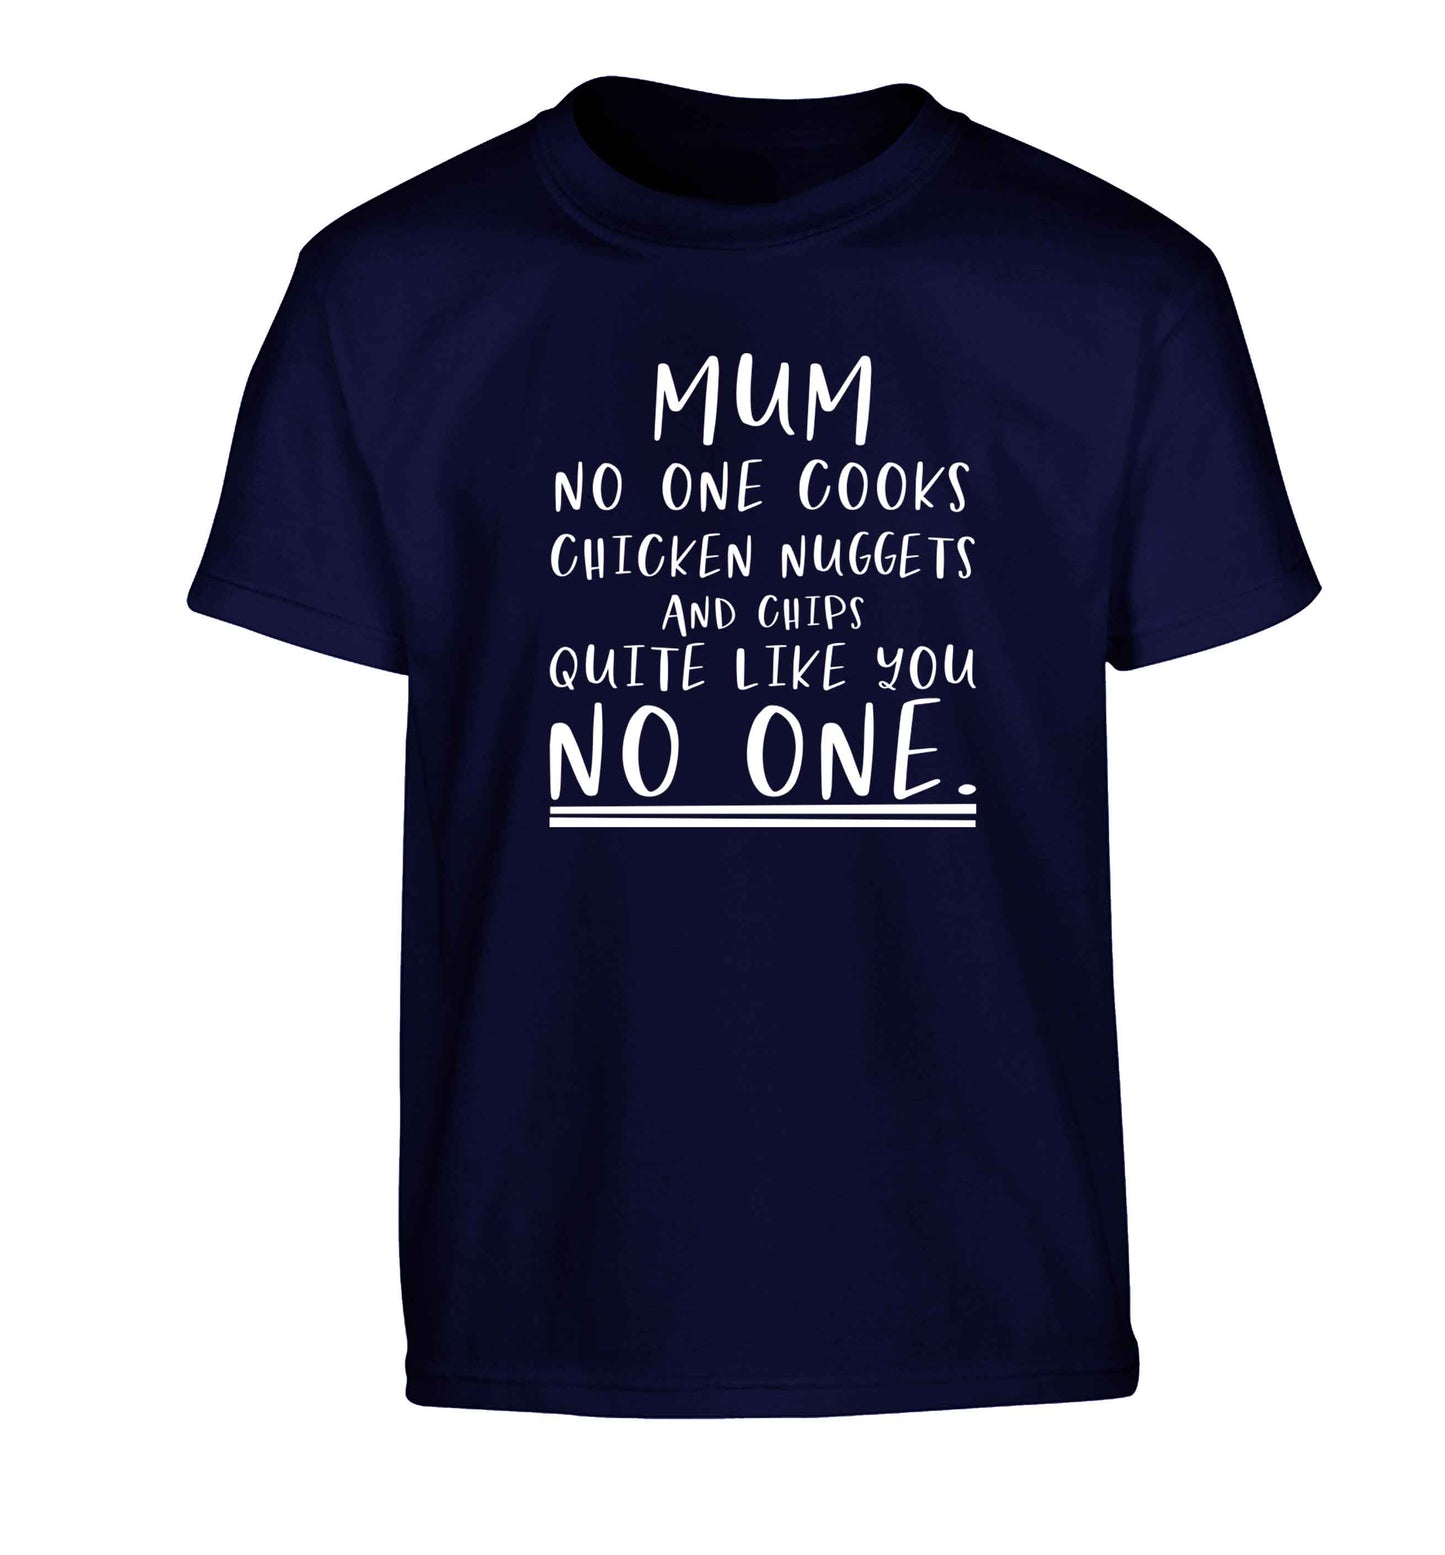 Super funny sassy gift for mother's day or birthday!  Mum no one cooks chicken nuggets and chips like you no one Children's navy Tshirt 12-13 Years